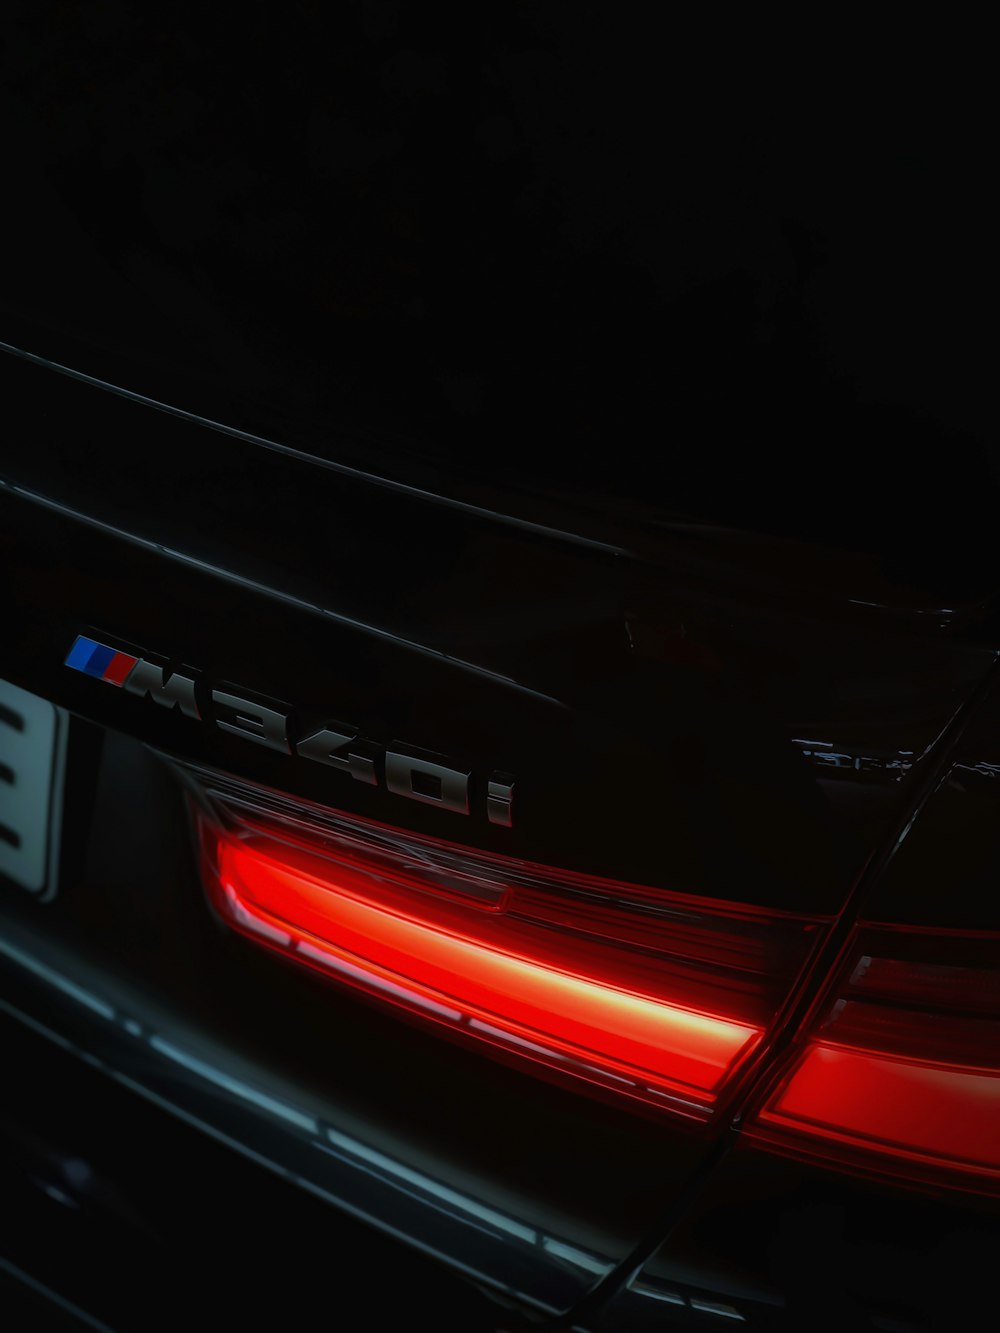 the rear end of a bmw car in the dark